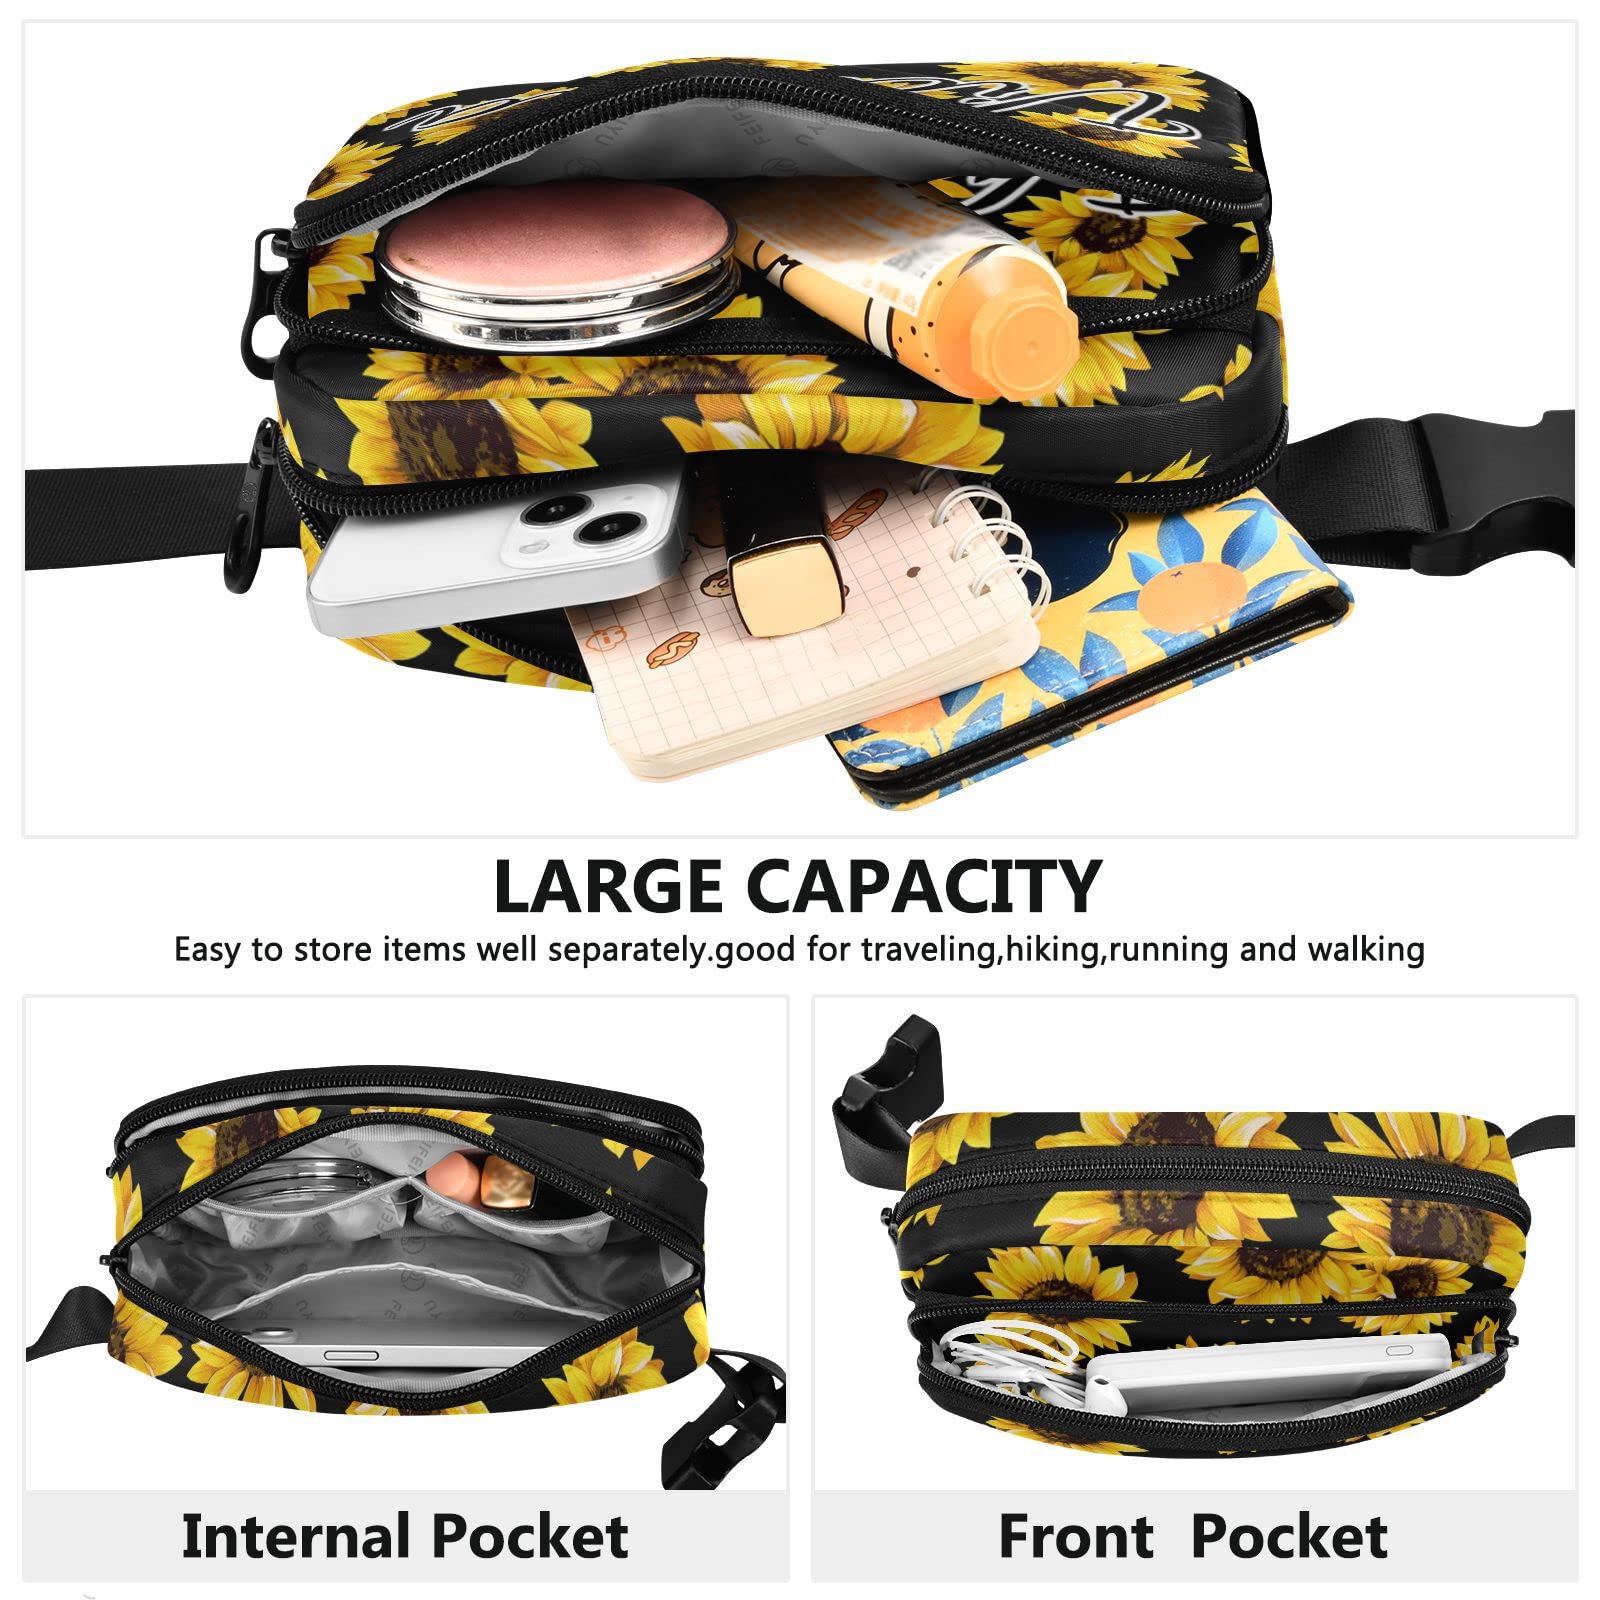 Custom Black Sunflowers Fanny Packs for Women Men Personalized Belt Bag with Adjustable Strap Customized Fashion Waist Packs Crossbody Bag Waist Pouch for Sports Running